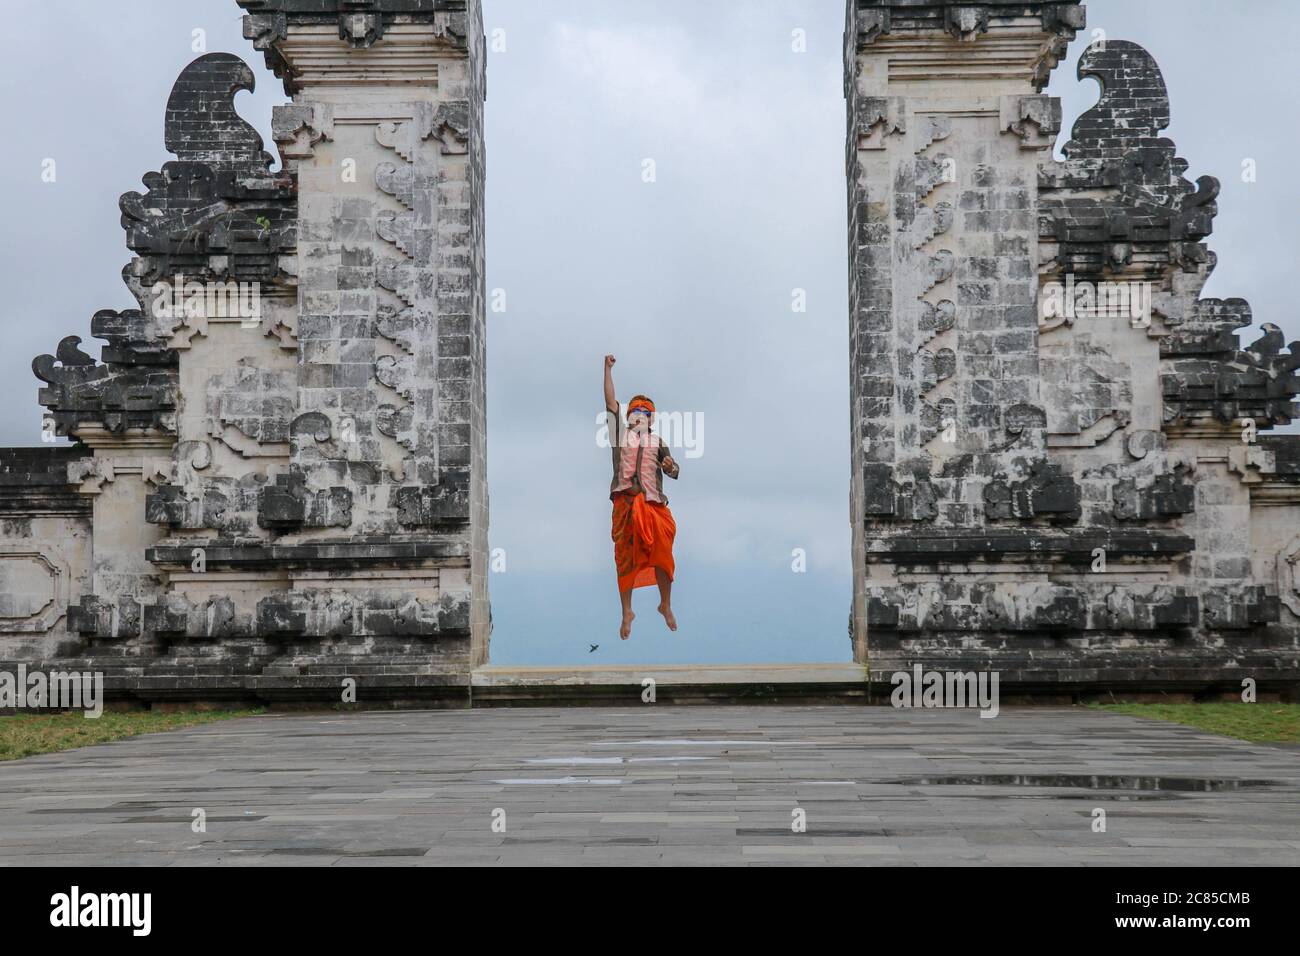 Bali Indonesia Traveler Man Jumping With Energy And Happiness In The Gate Of Heaven Lempuyang Temple Stock Photo Alamy